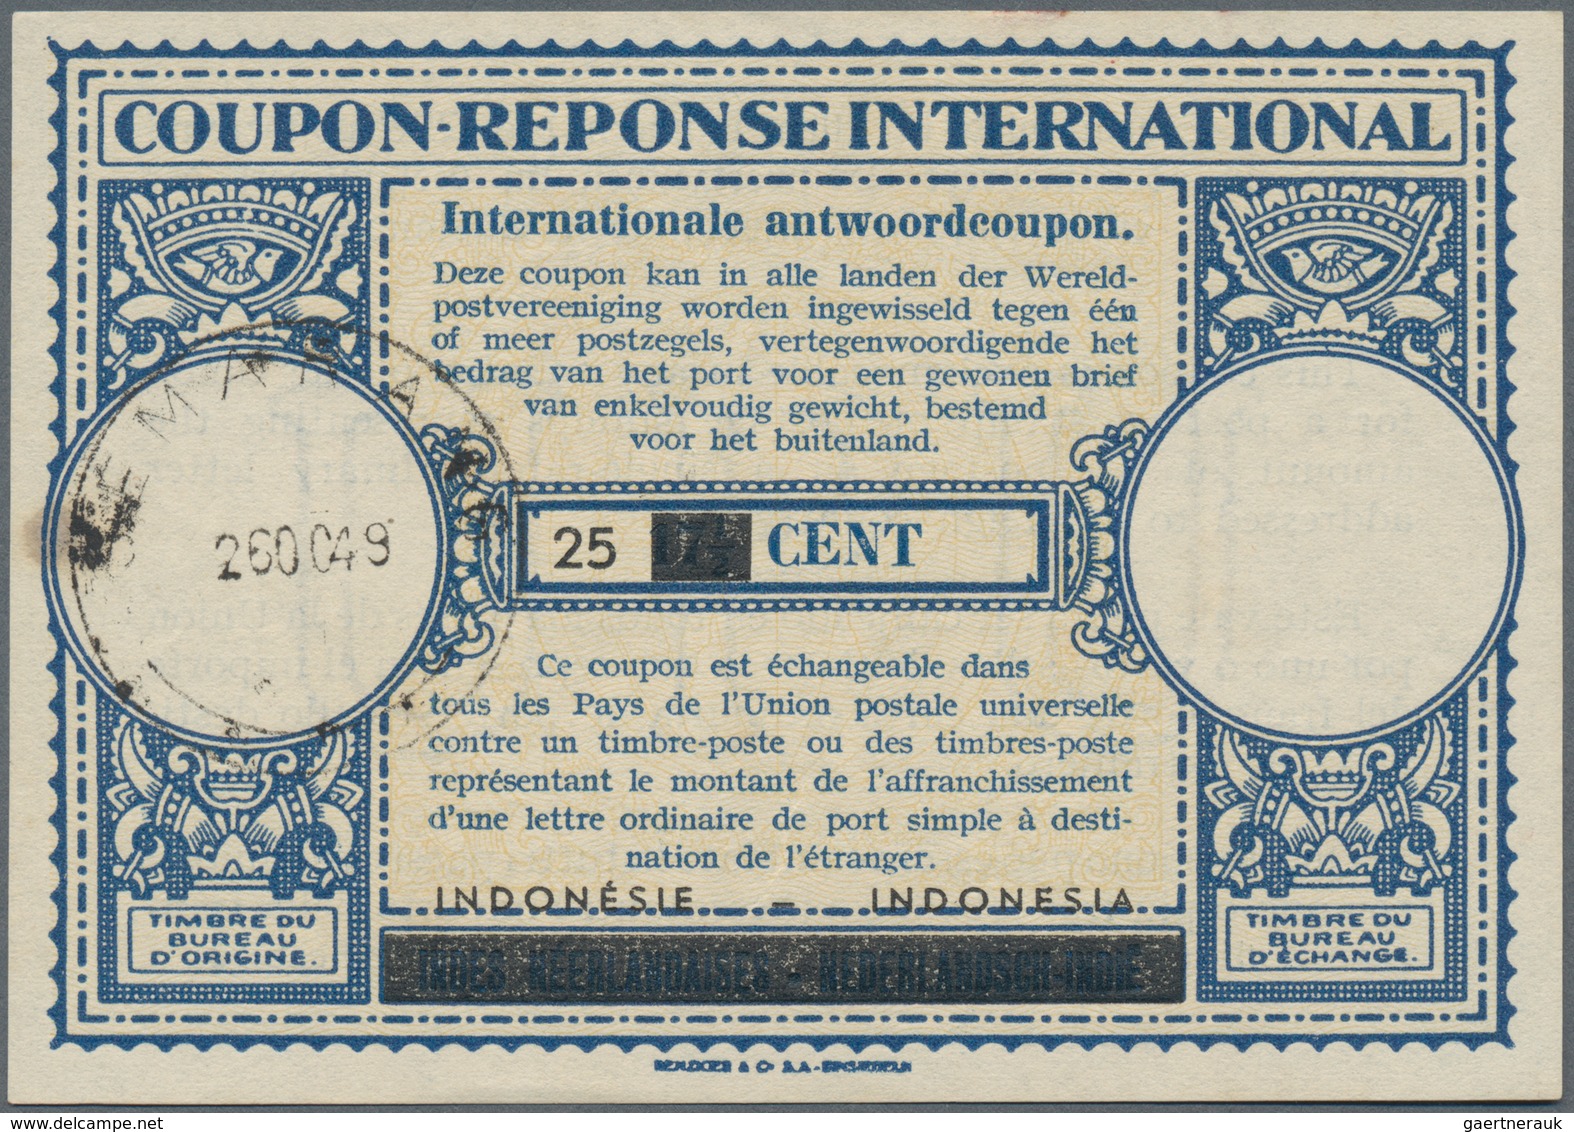 Indonesien: 1949, International Reply Coupon IRC, Surcharged 25 CENT On Old DEI Form Canc. "SEMARANG - Indonesien